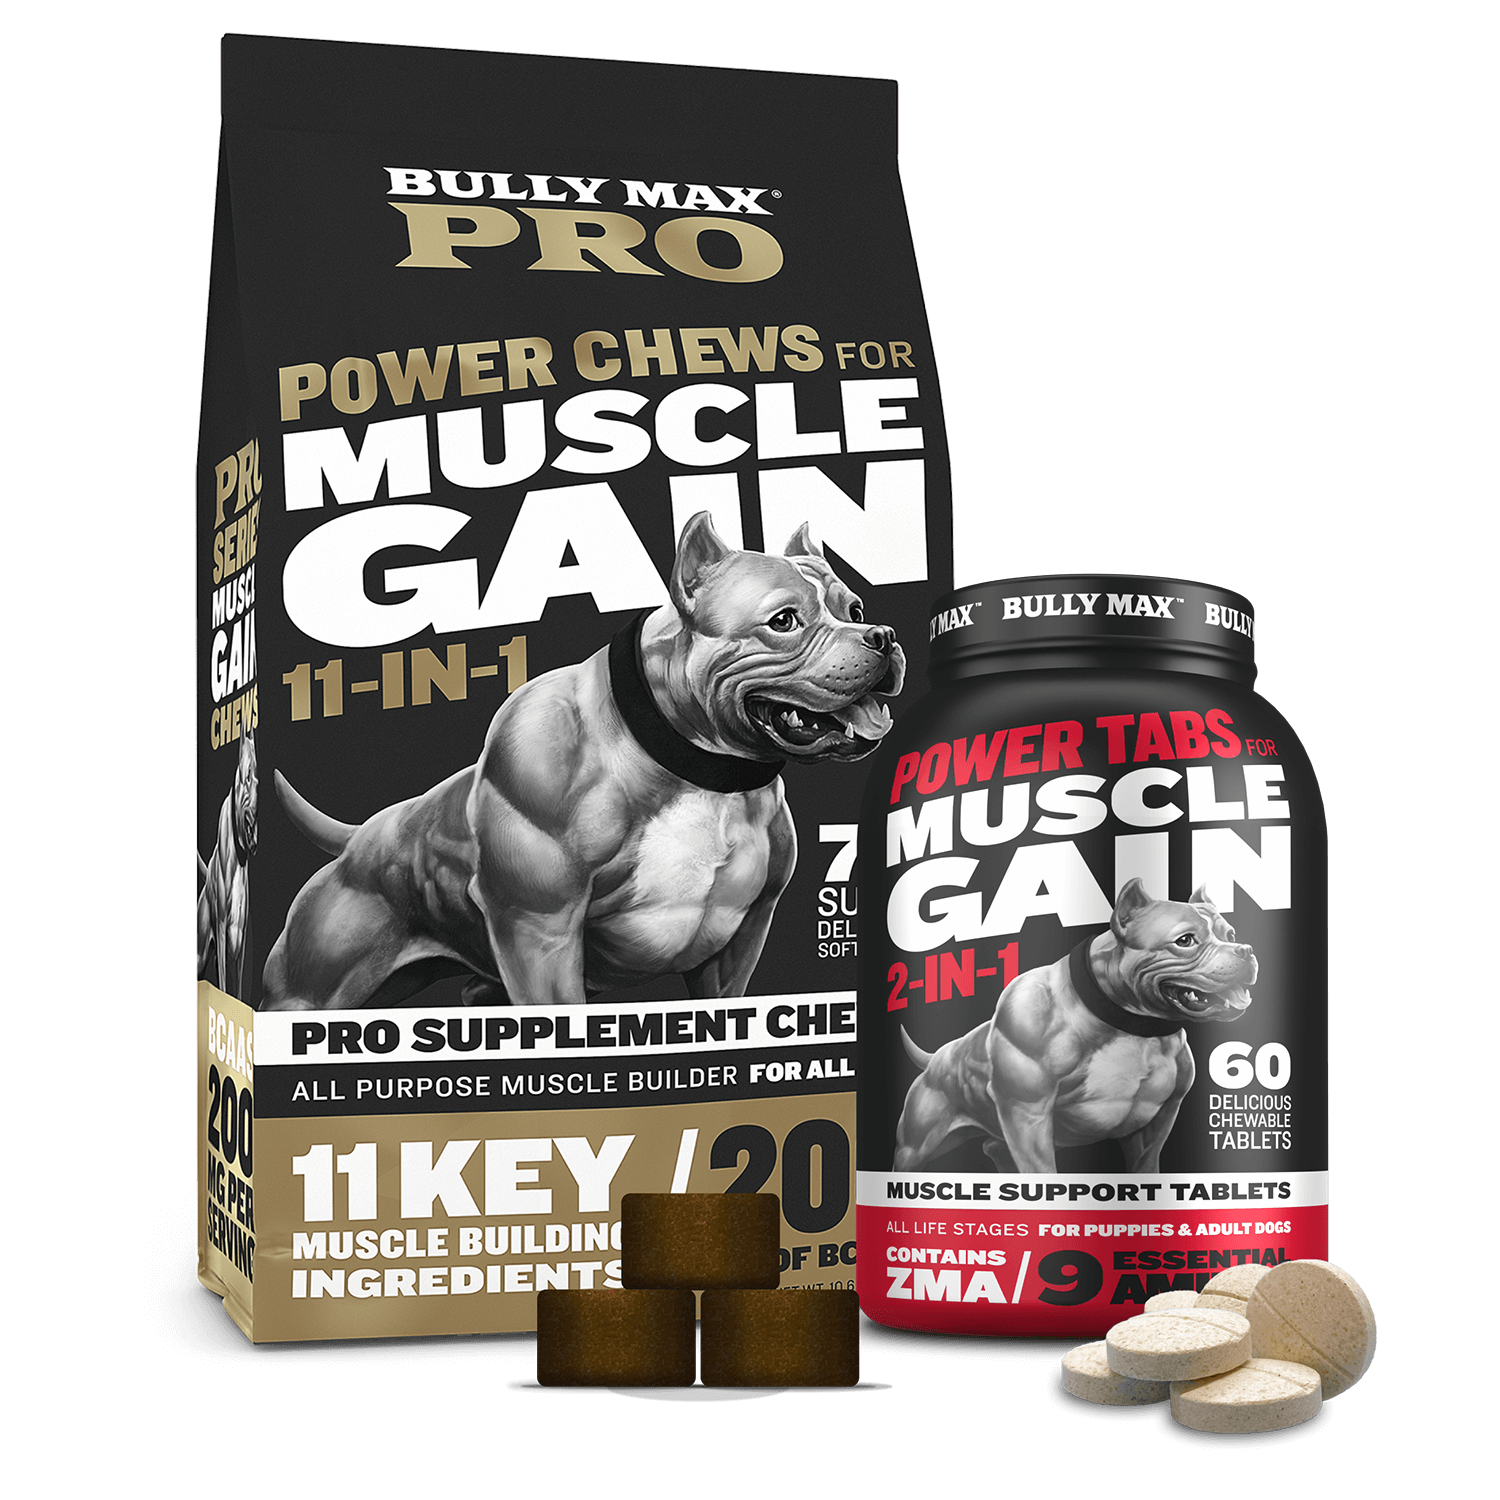 Bully Max Nutrition Plans